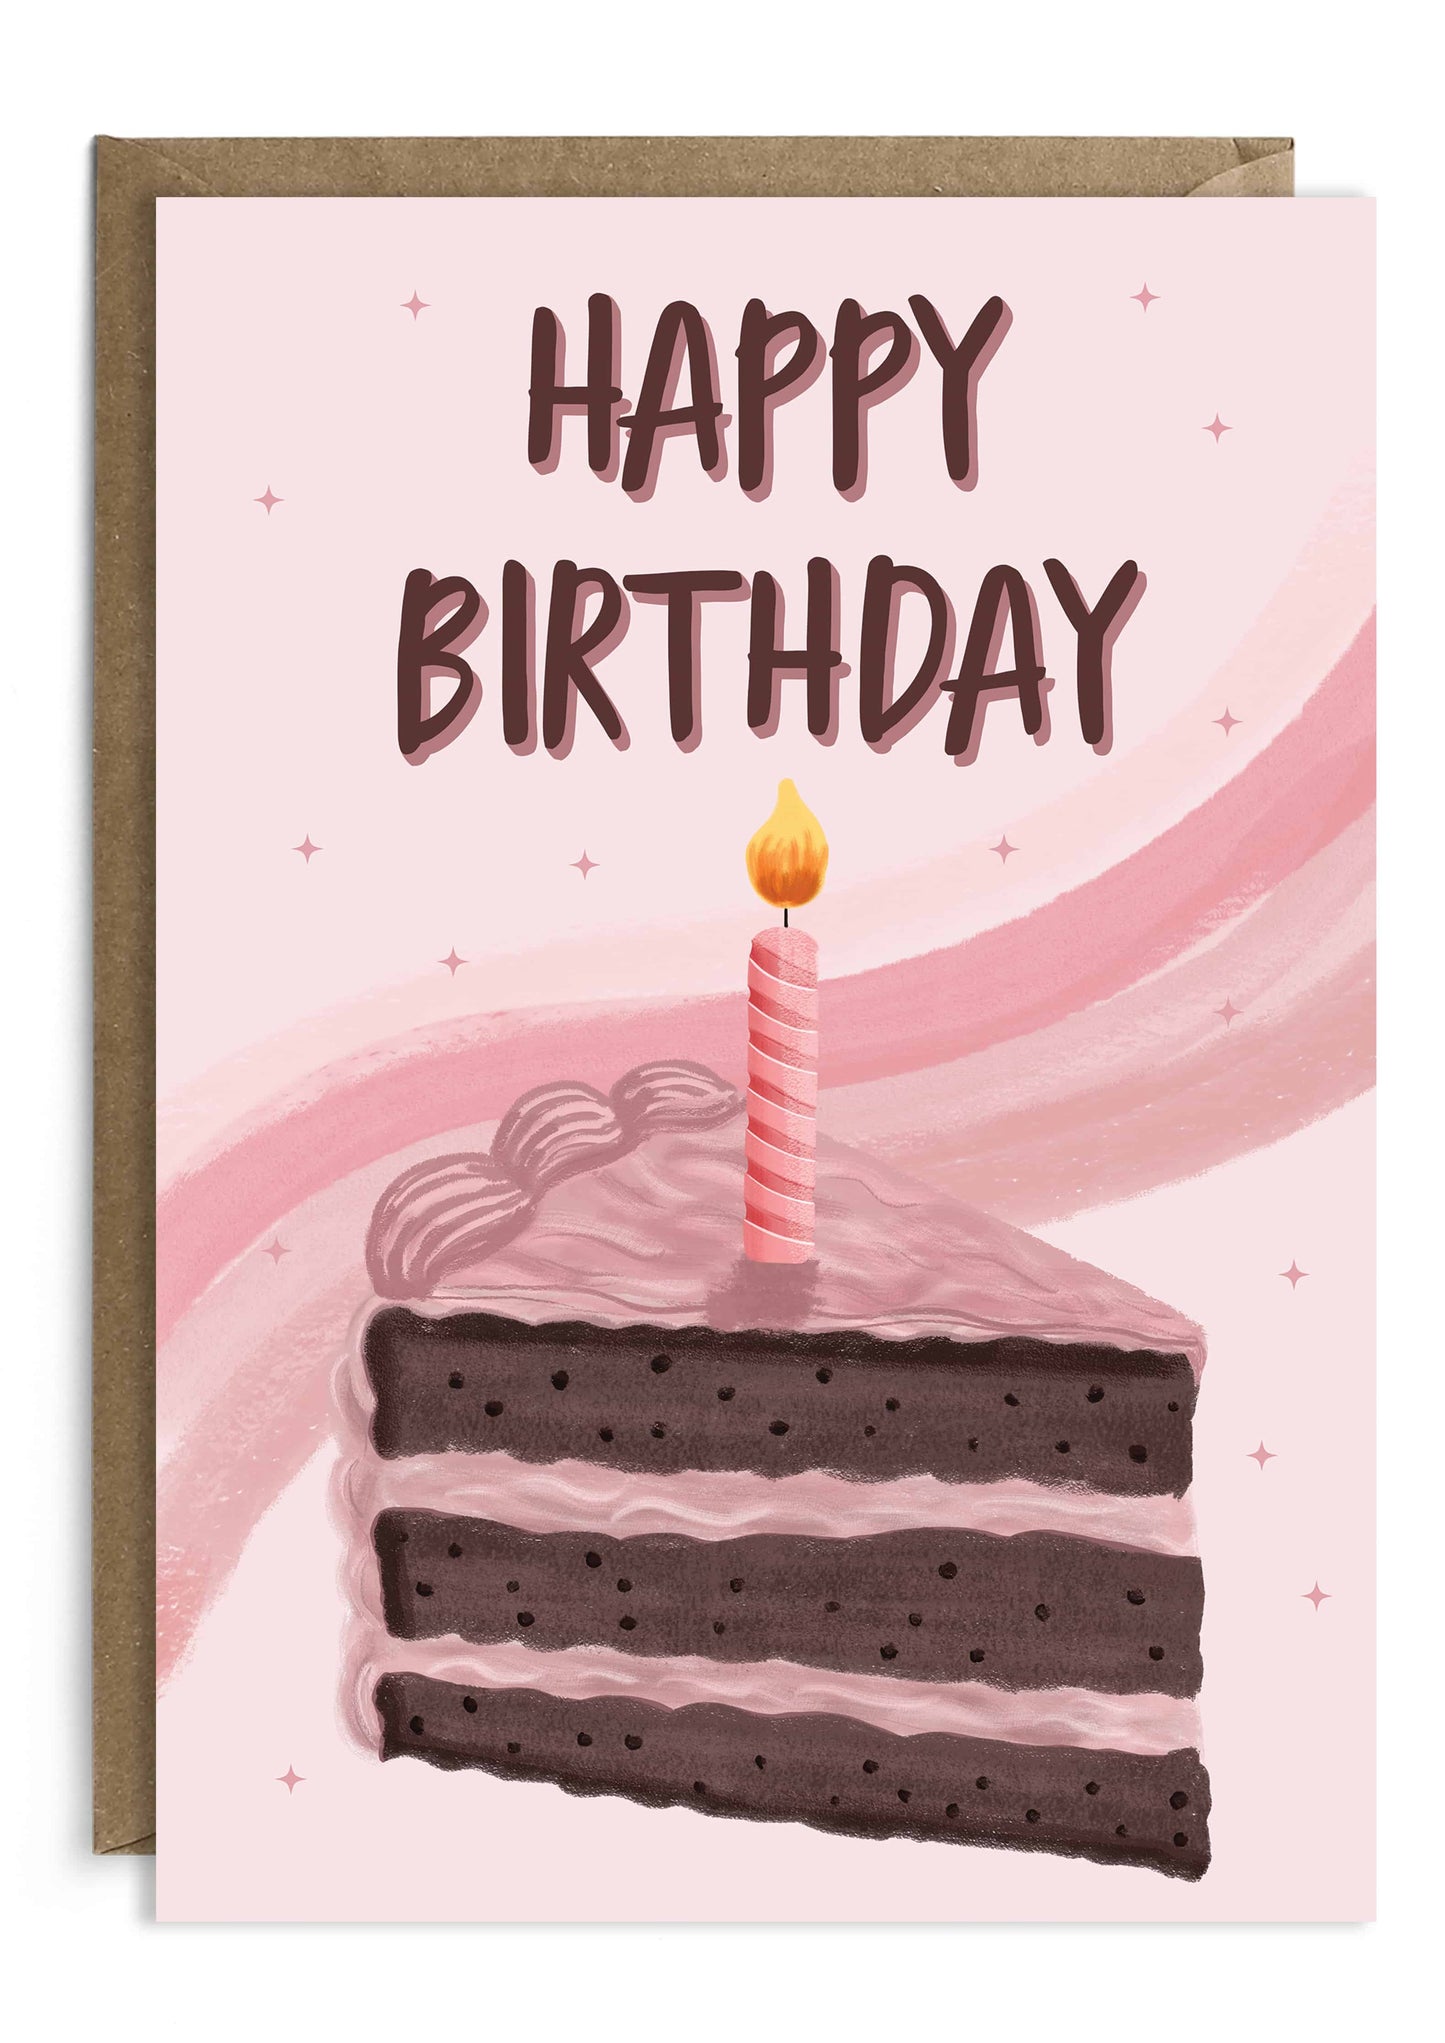 Chocolate cake slice with candle in pink. Birthday cards saying Happy Birthday